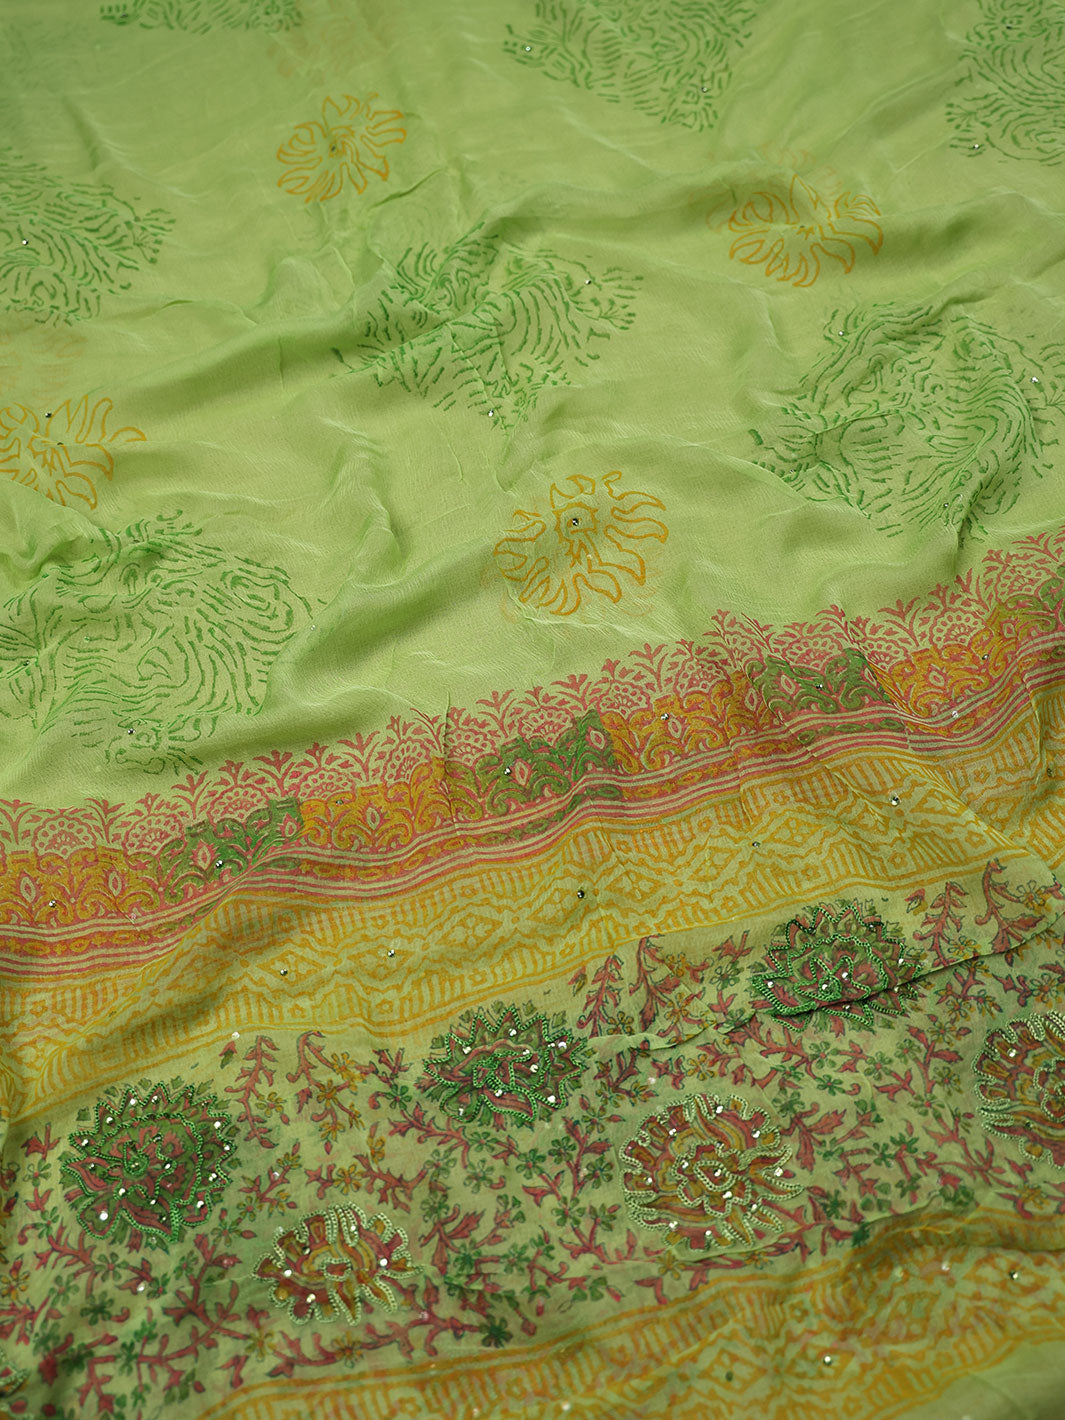 Green Kota Cotton Unstiched Chudidhar Material - A6746 - View 5